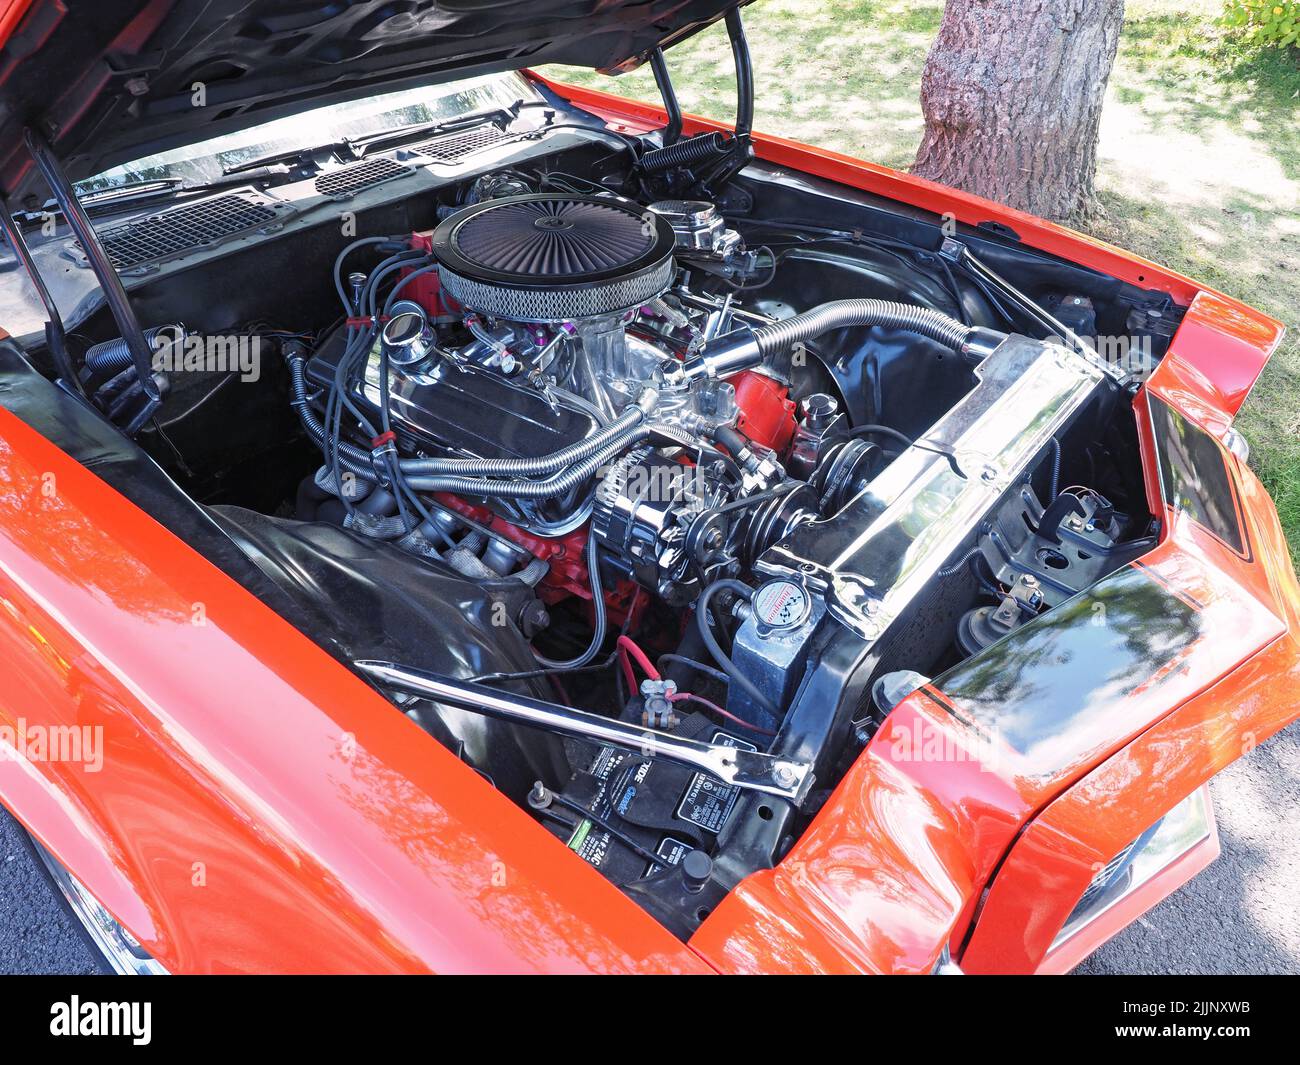 The engine bay of a 1970 General Motors, Chevy Camaro Z28 in Hugger Orange, with a 7.4lt, 454cu V8 conversion. Stock Photo